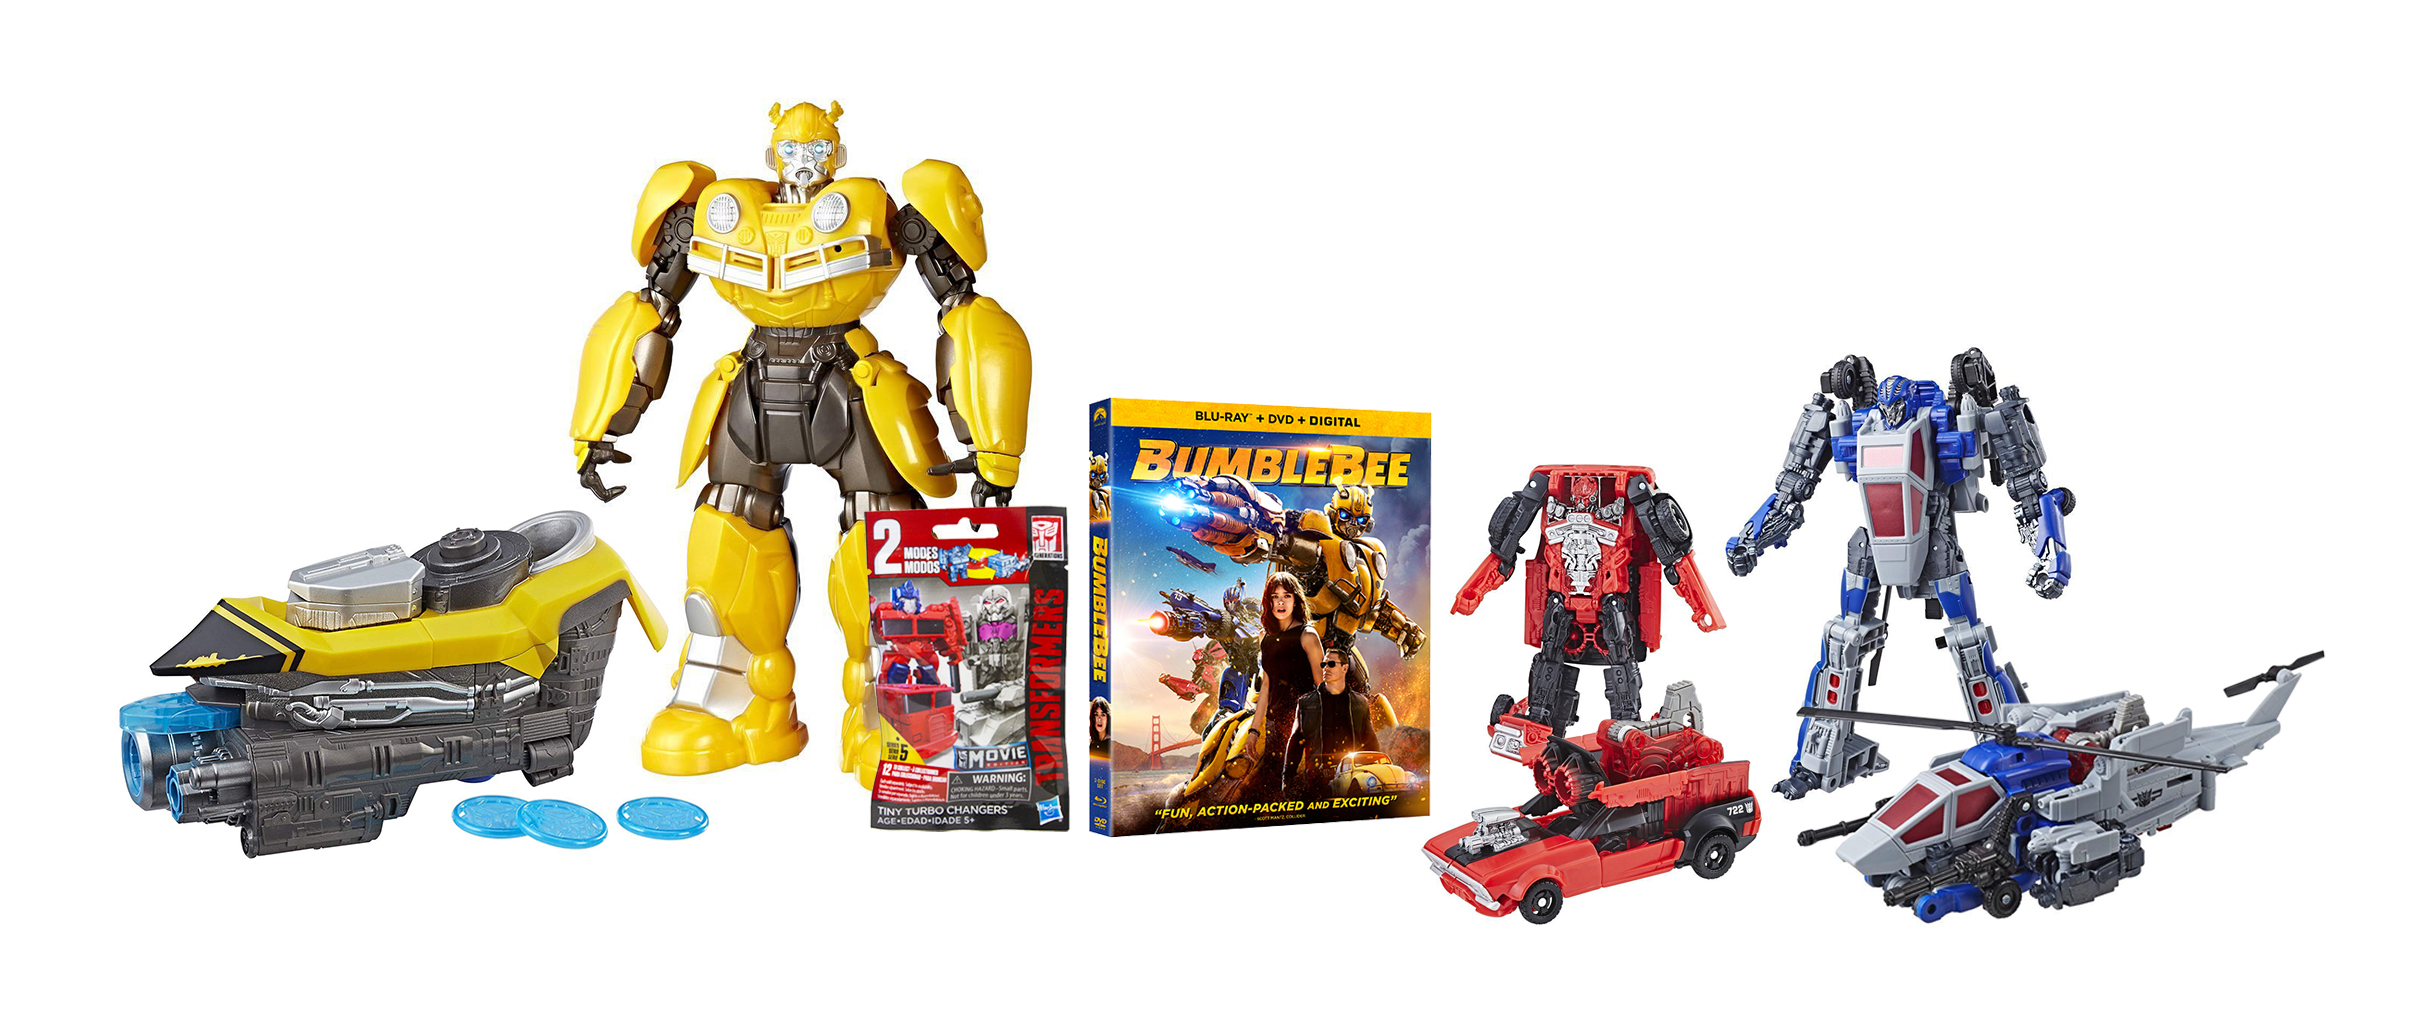 best gift ideas for Bumblebee fans